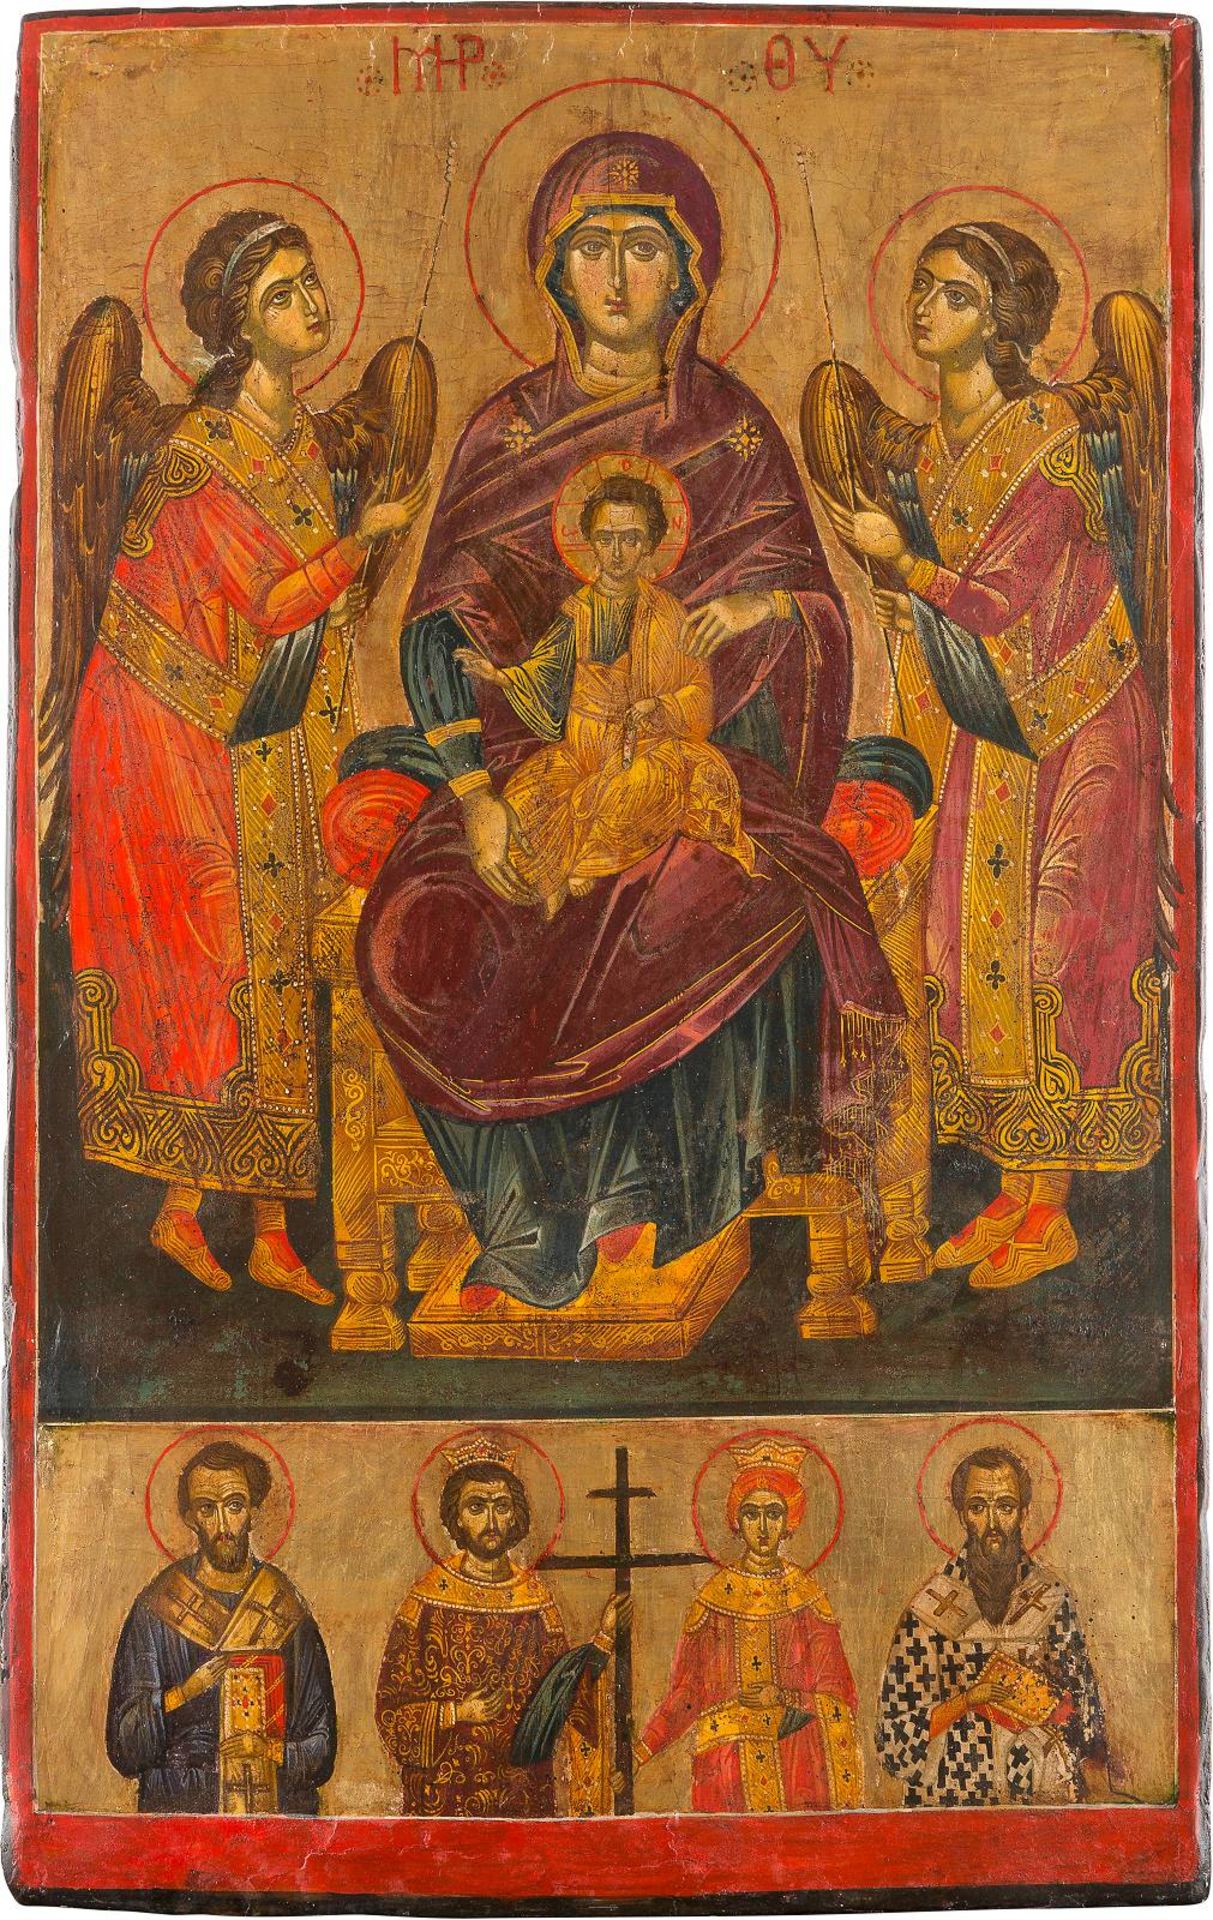 A LARGE ICON SHOWING THE ENTHRONED MOTHER OF GOD AND SAINTSGreek, in the 17th century style